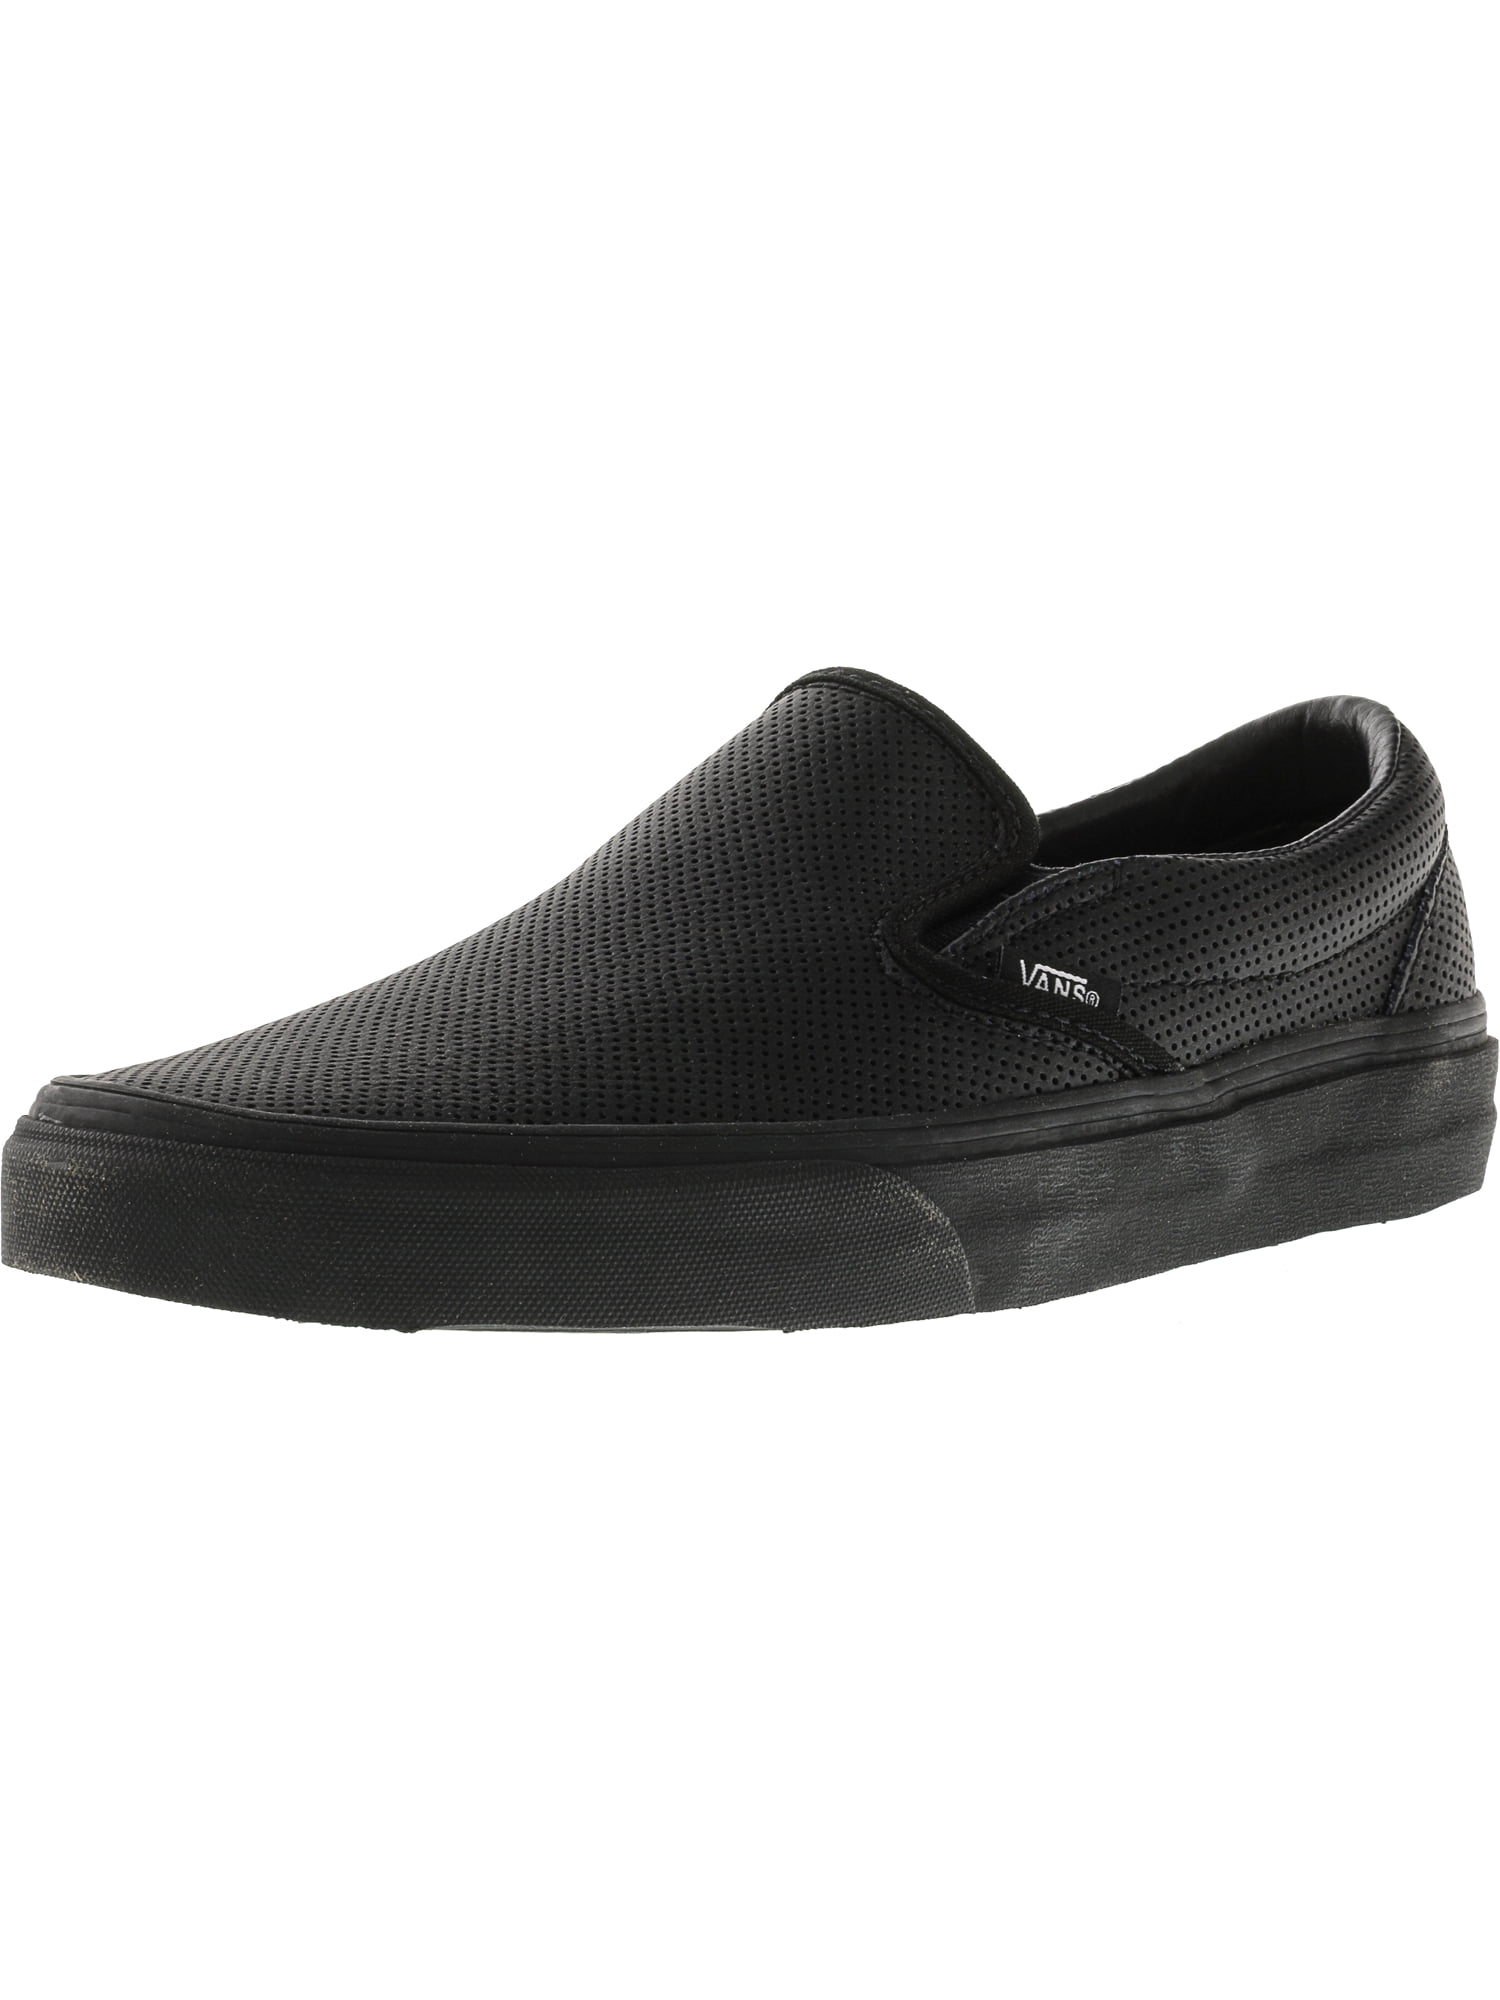 Vans Classic Slip-On Perforated Leather Black / Ankle-High Canvas Fashion Sneaker 8M 6.5M - Walmart.com